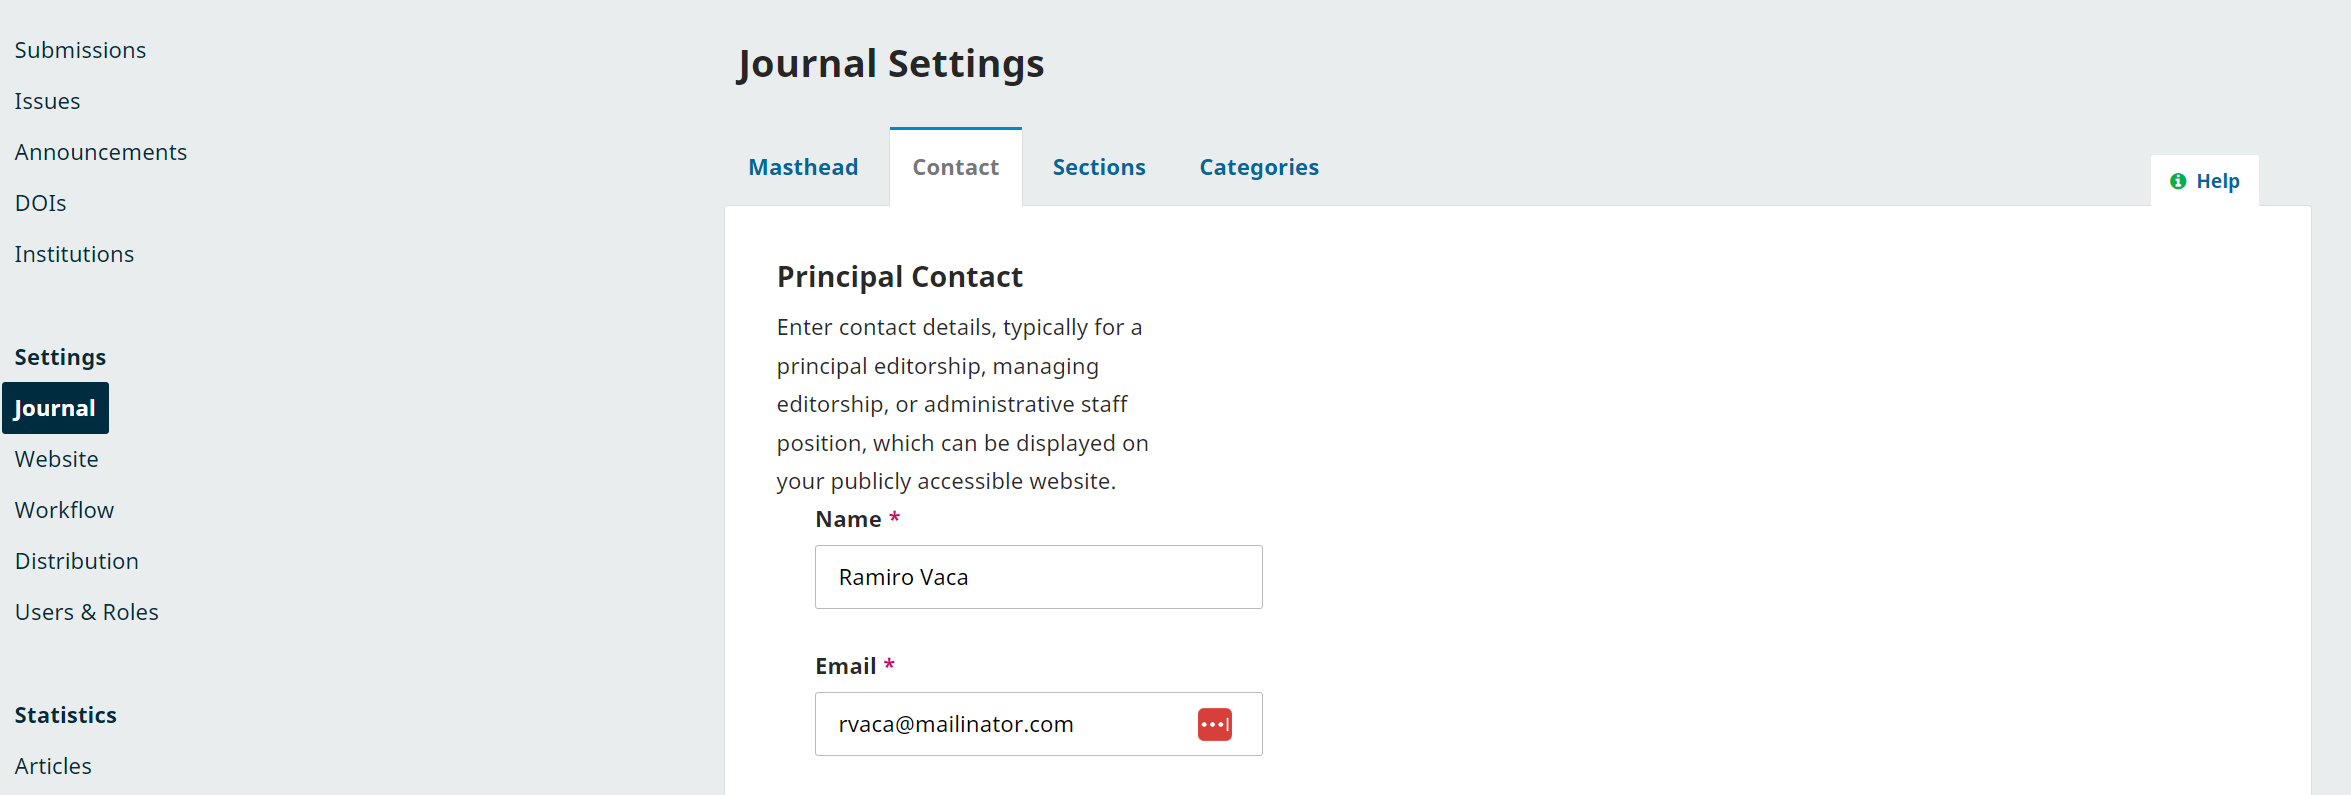 OJS dashboard view of Journal Settings submenu Contact where information can be added in text fields.